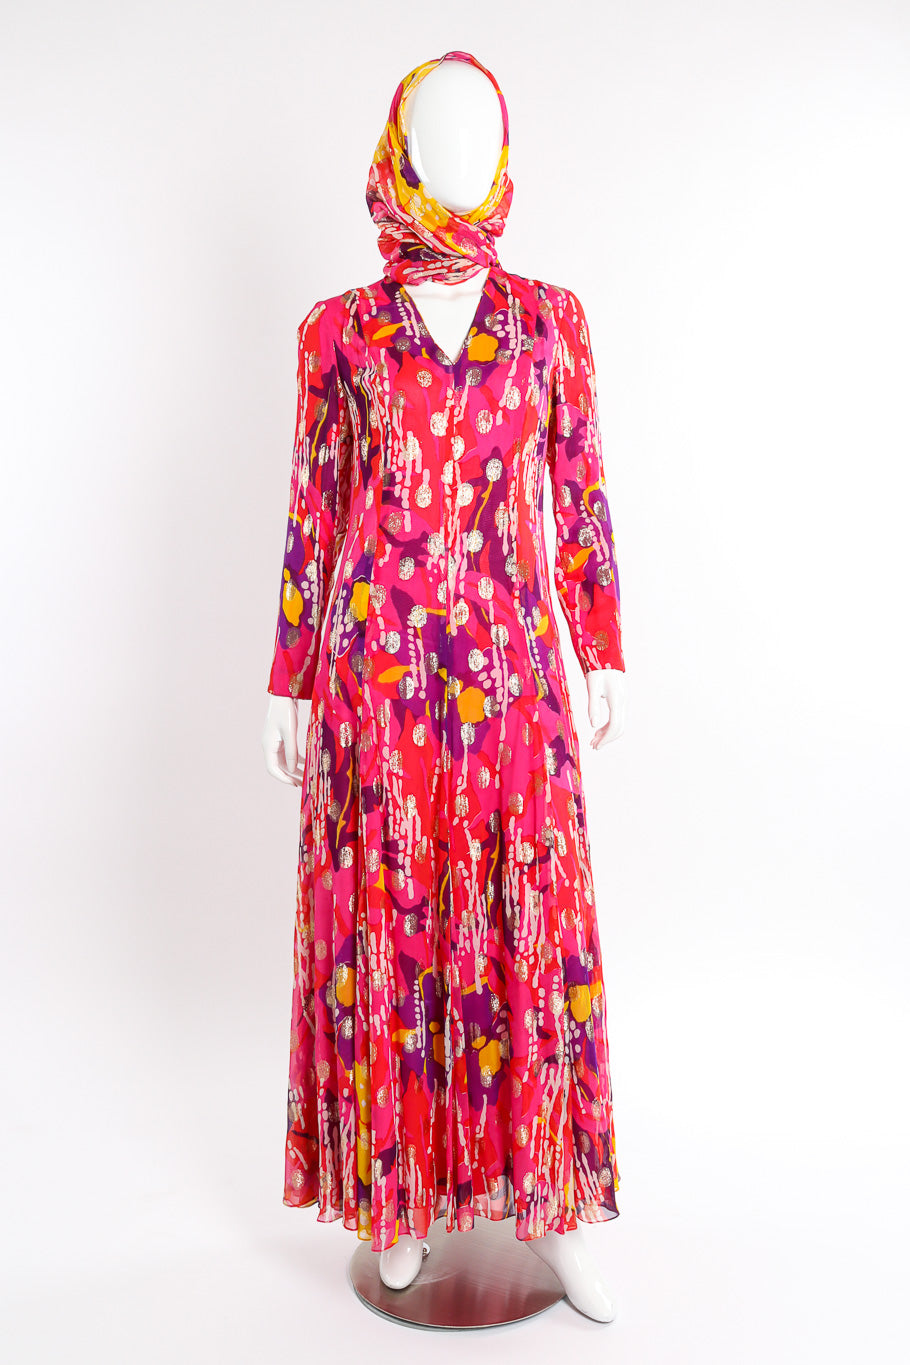 Vintage Doreen Loh Abstract Floral Print Maxi Dress front view on mannequin with sash around head @Recessla